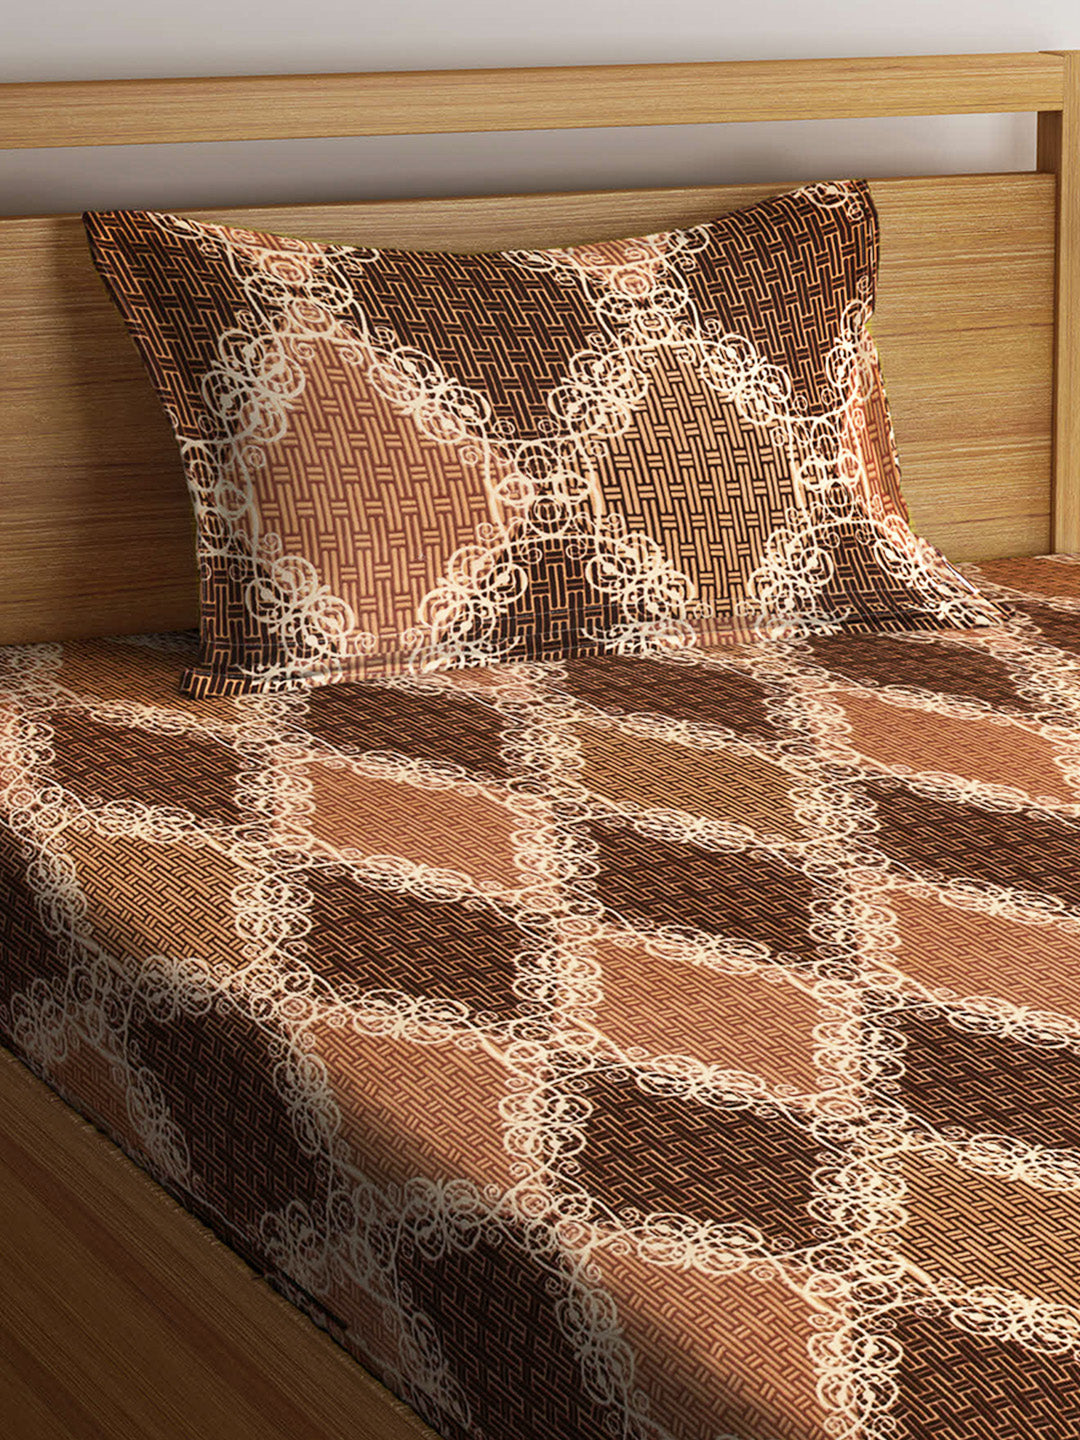 Arrabi Brown Abstract TC Cotton Blend Single Size Fitted Bedsheet with 1 Pillow Cover (220 X 150 cm)